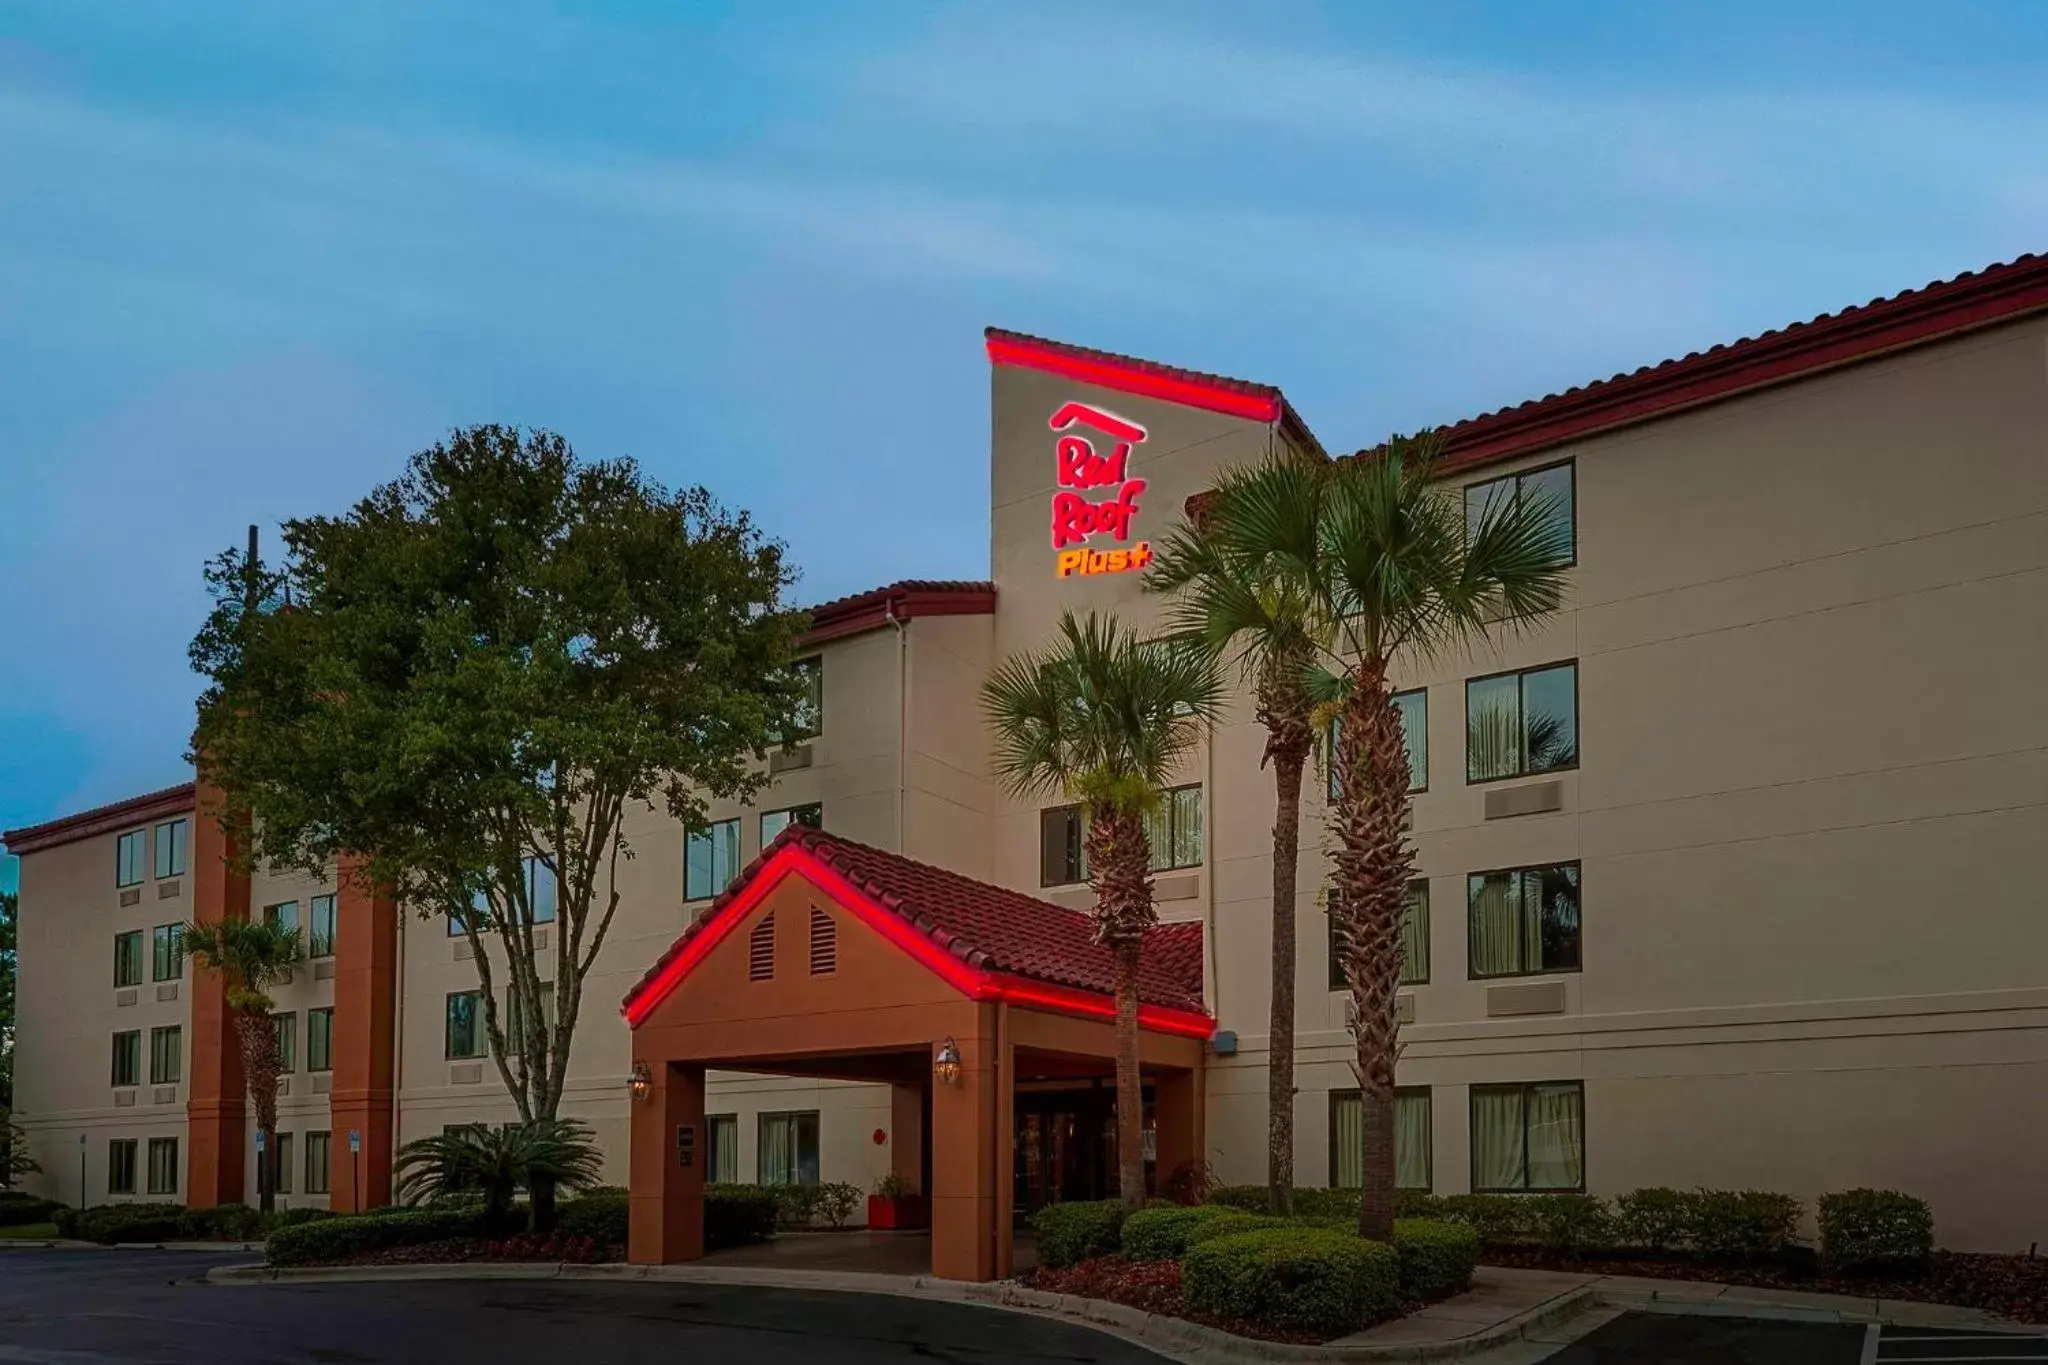 Property Building in Red Roof Inn PLUS + Gainesville